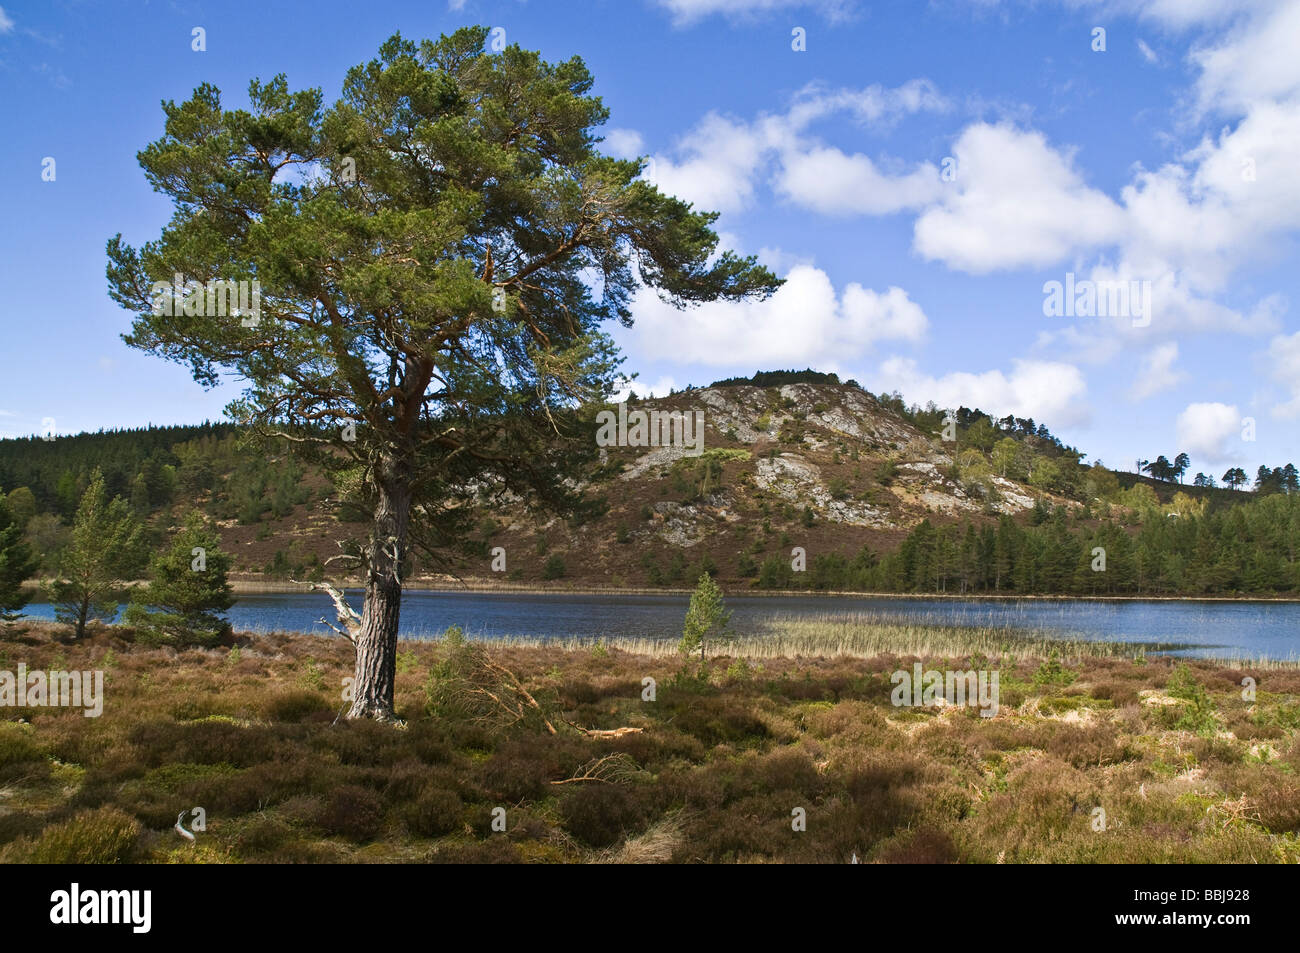 dh Loch Gamhna ROTHIEMURCHUS INVERNESSSHIRE Scots Pine Cairngorms National Park loch and Caledonian Forest tree scottish highland trees scotland lake Stock Photo